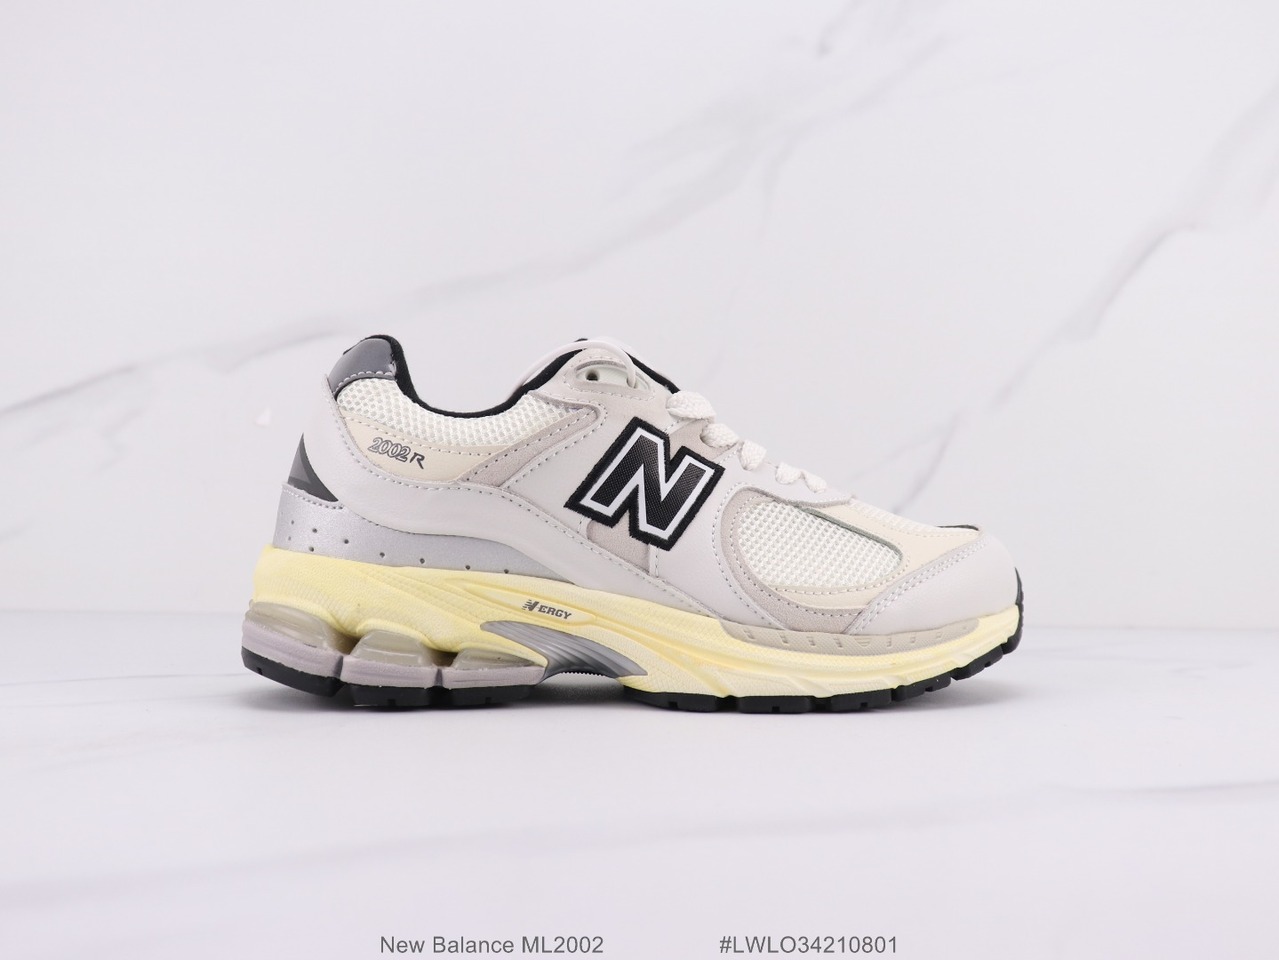 New Balance ML2002 running shoes daddy shoes